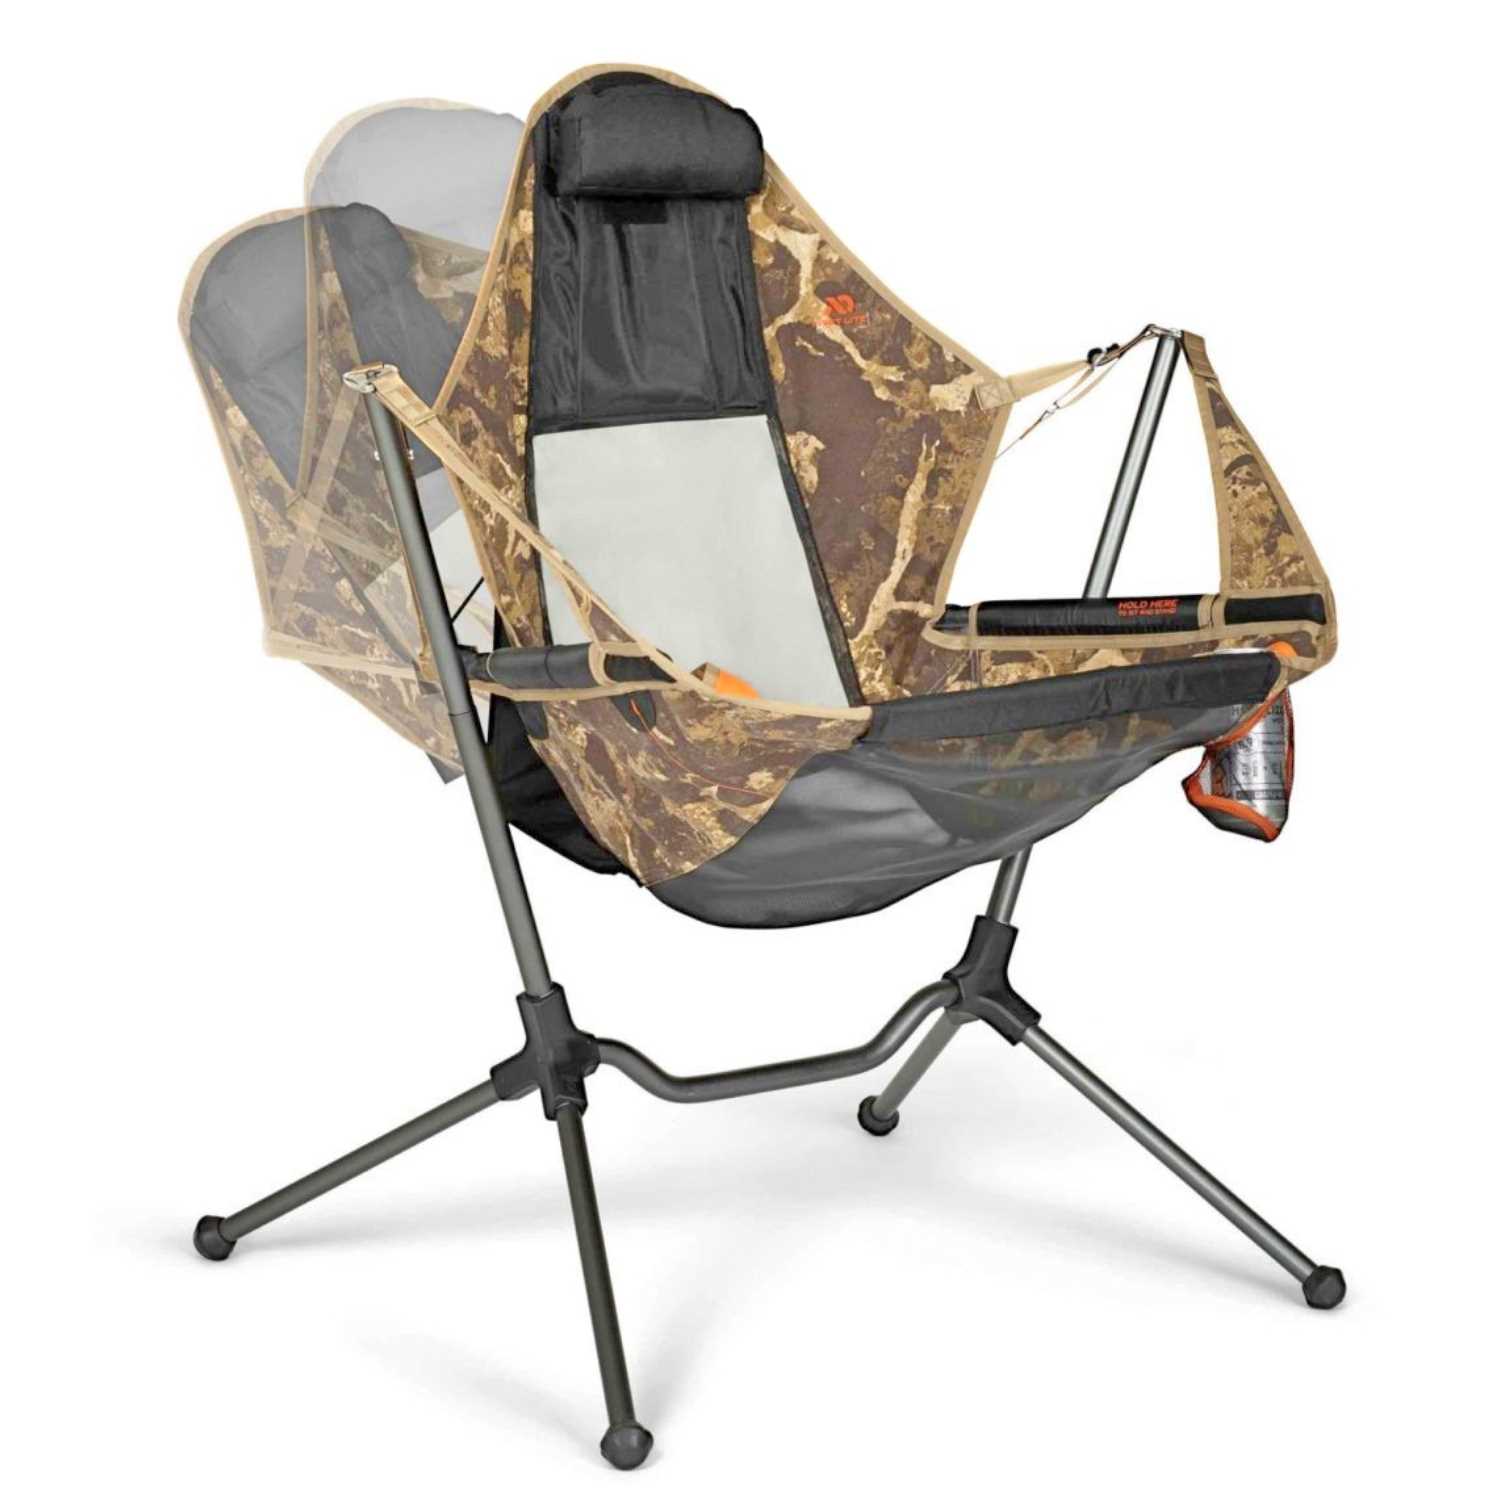 Hammock Swinging Luxury Camp Chair - Favorite Christmas Gifts For Him